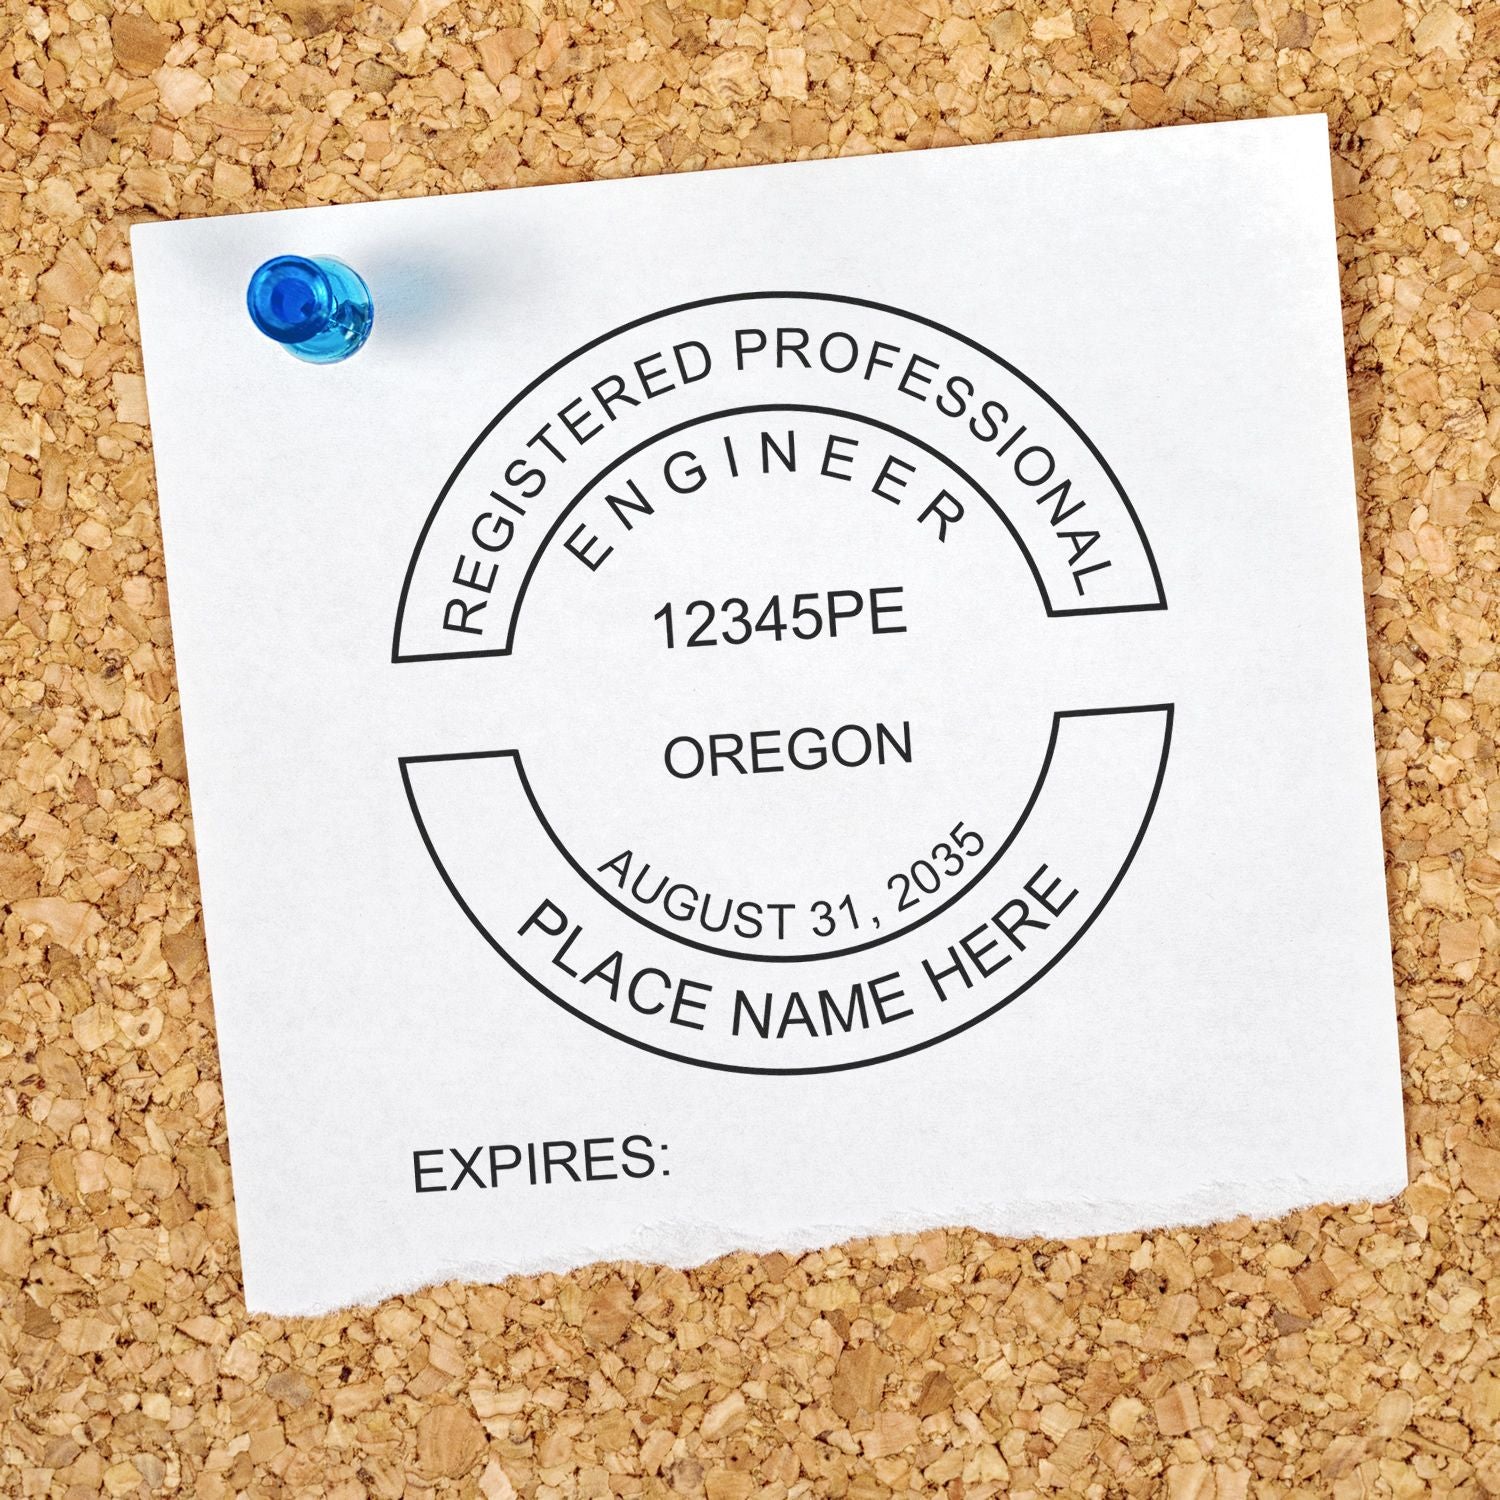 A lifestyle photo showing a stamped image of the Digital Oregon PE Stamp and Electronic Seal for Oregon Engineer on a piece of paper